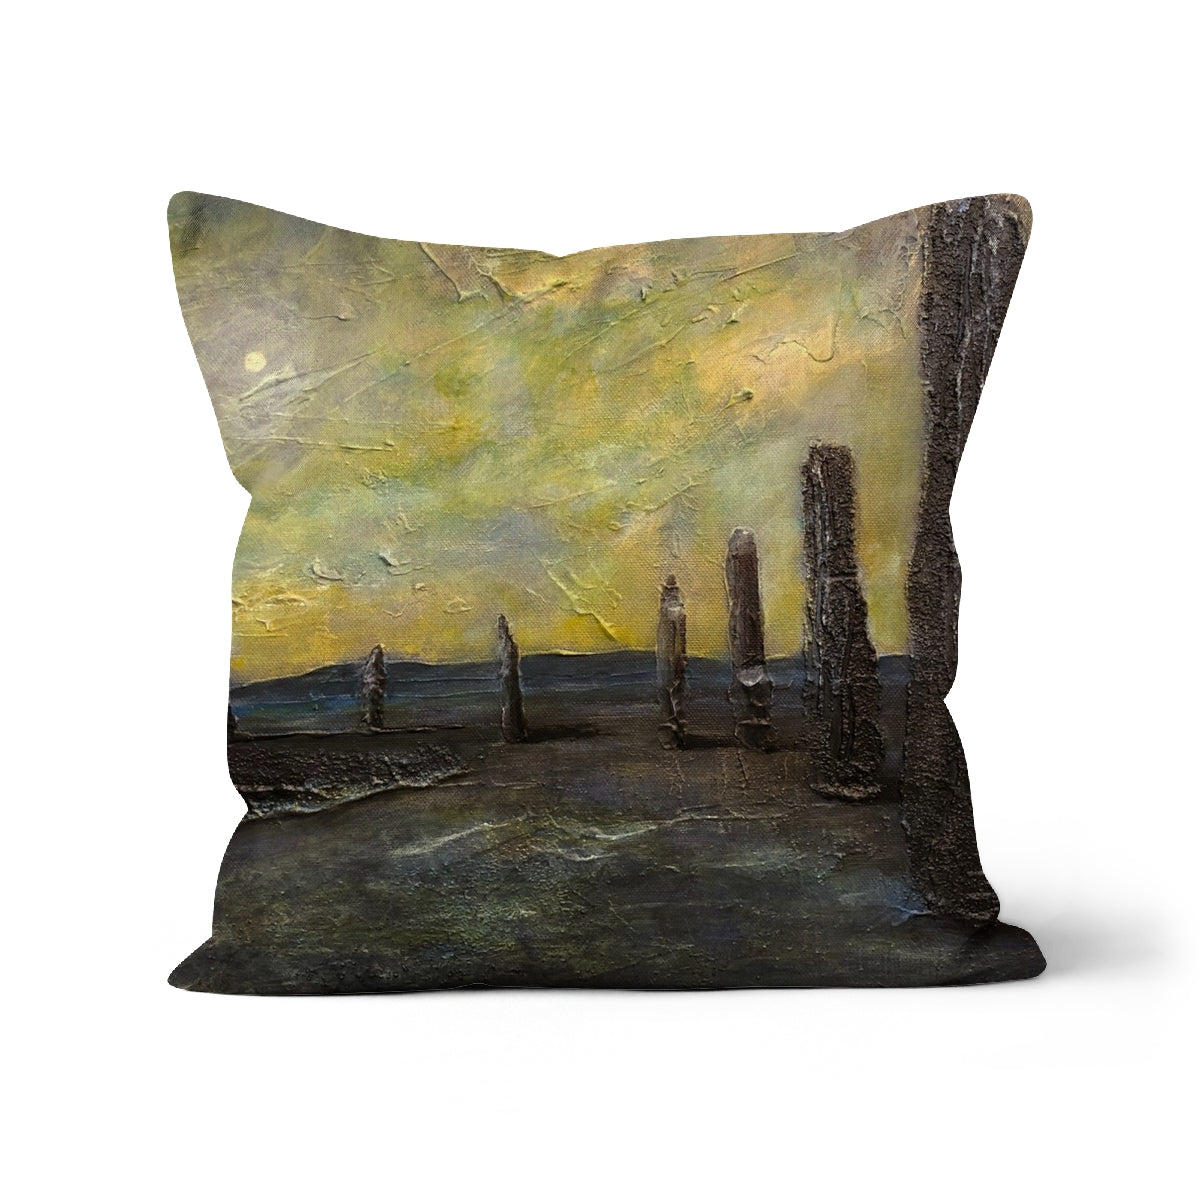 An Ethereal Ring Of Brodgar Art Gifts Cushion-Cushions-Orkney Art Gallery-Canvas-18"x18"-Paintings, Prints, Homeware, Art Gifts From Scotland By Scottish Artist Kevin Hunter